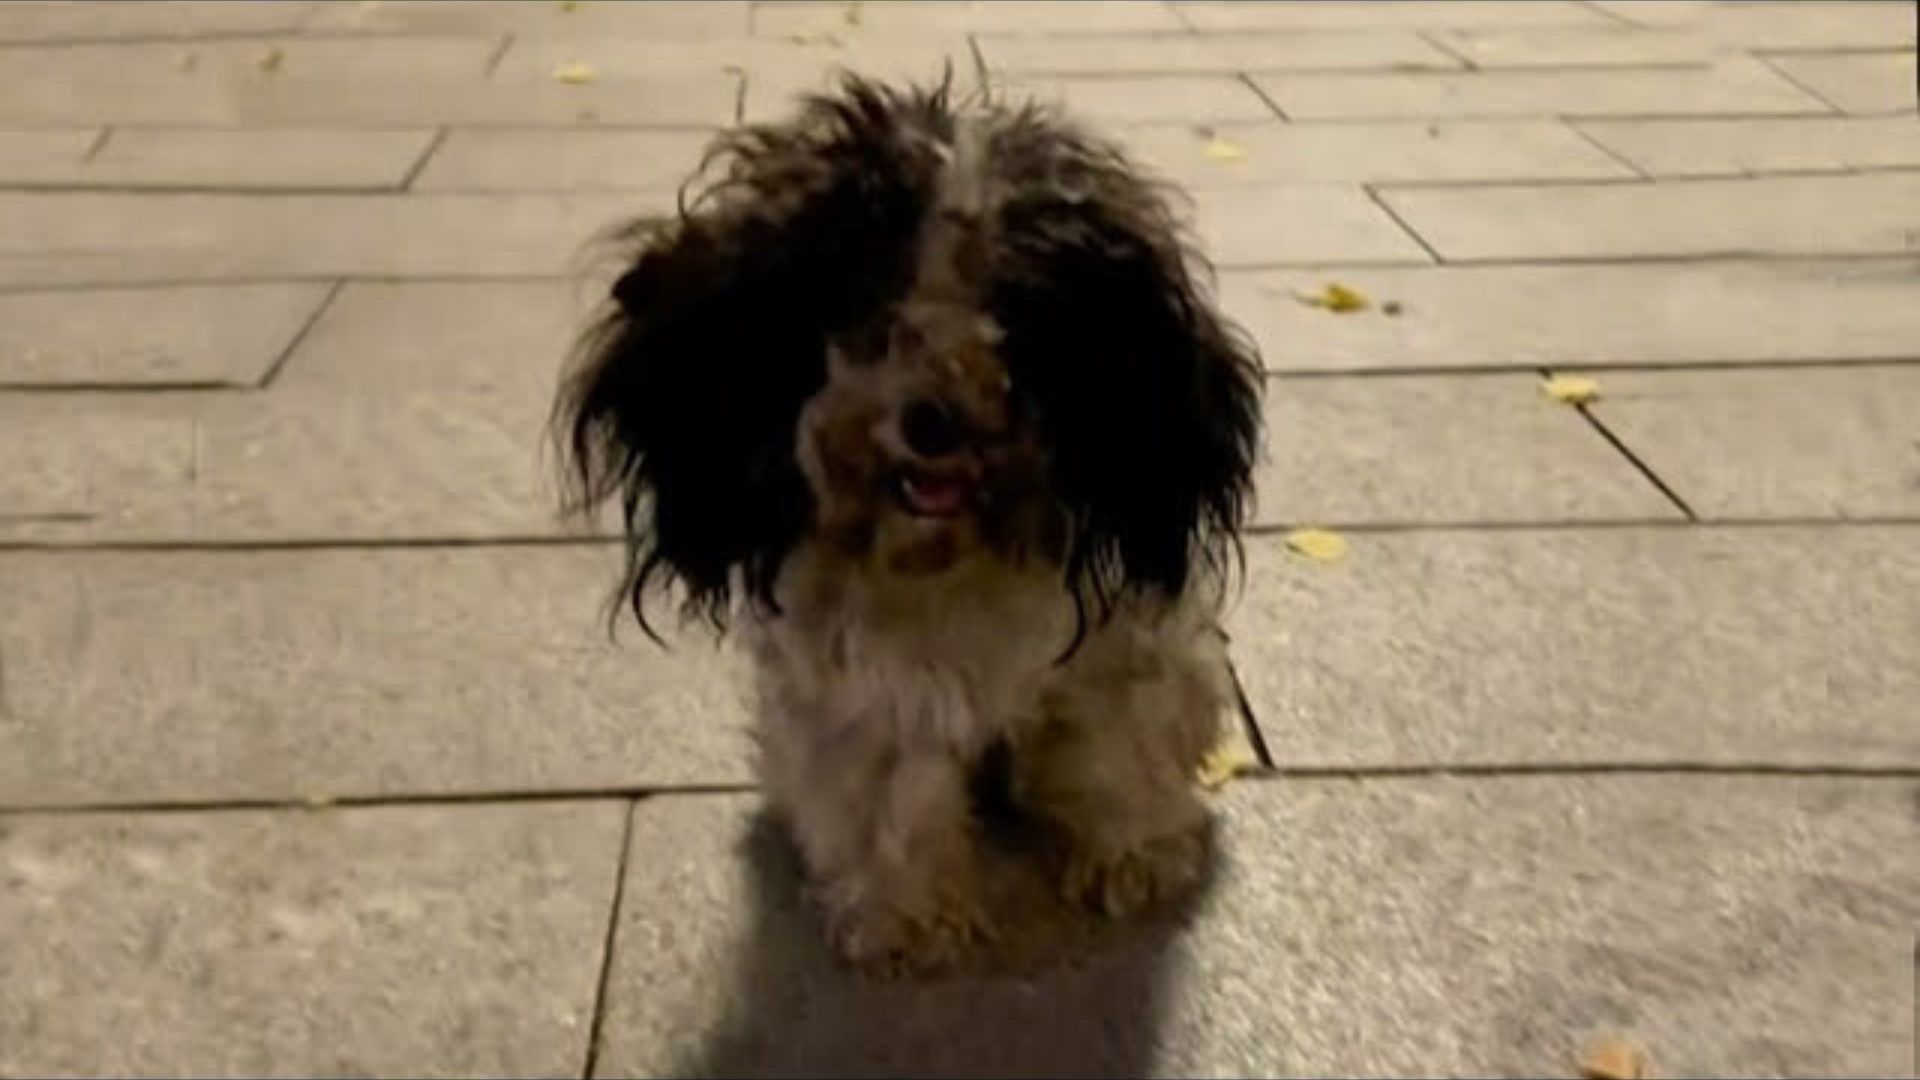 A Little Stray Puppy Who Kept Crawling On The Square, Pleading For Food, Finally Meets Kind Souls